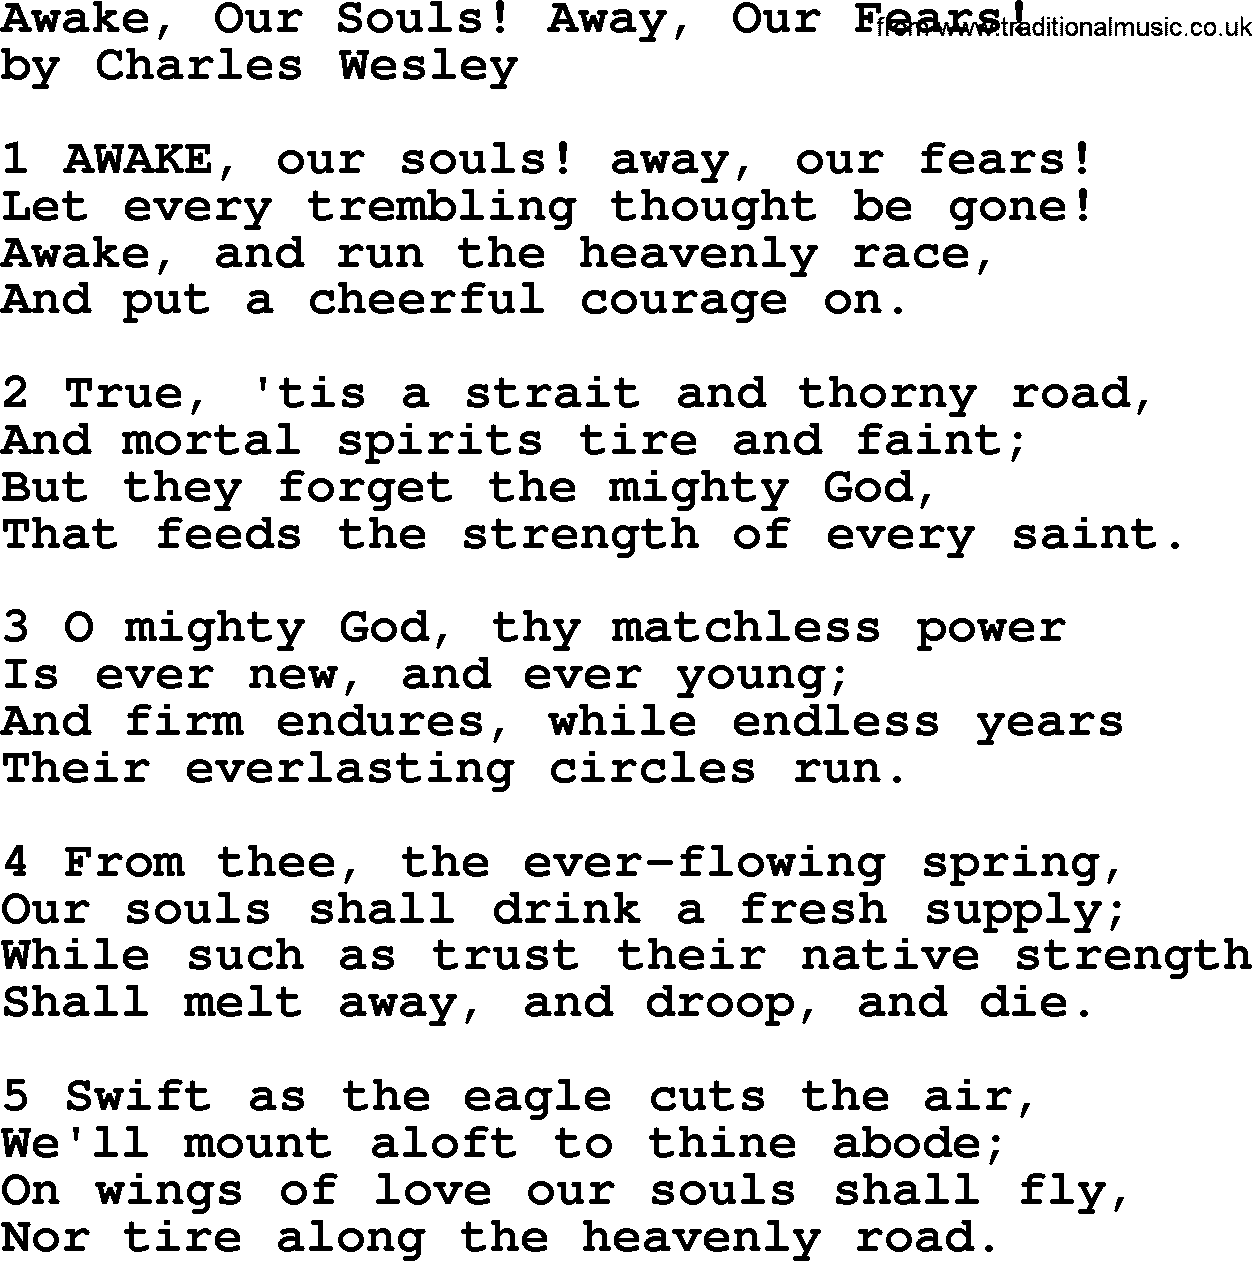 Charles Wesley hymn: Awake, Our Souls! Away, Our Fears!, lyrics